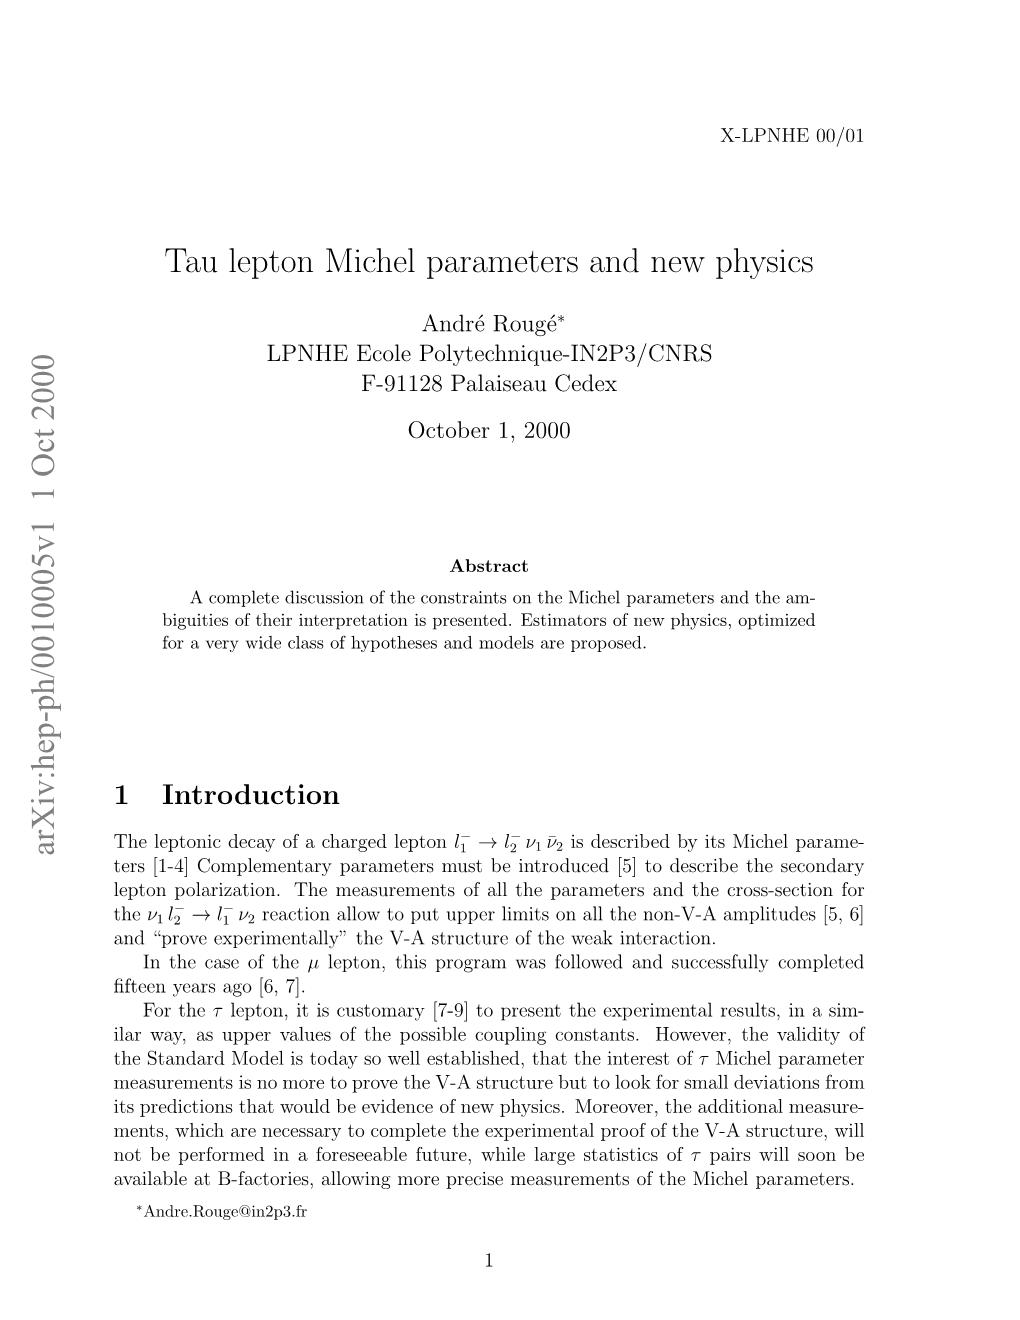 Tau Lepton Michel Parameters and New Physics